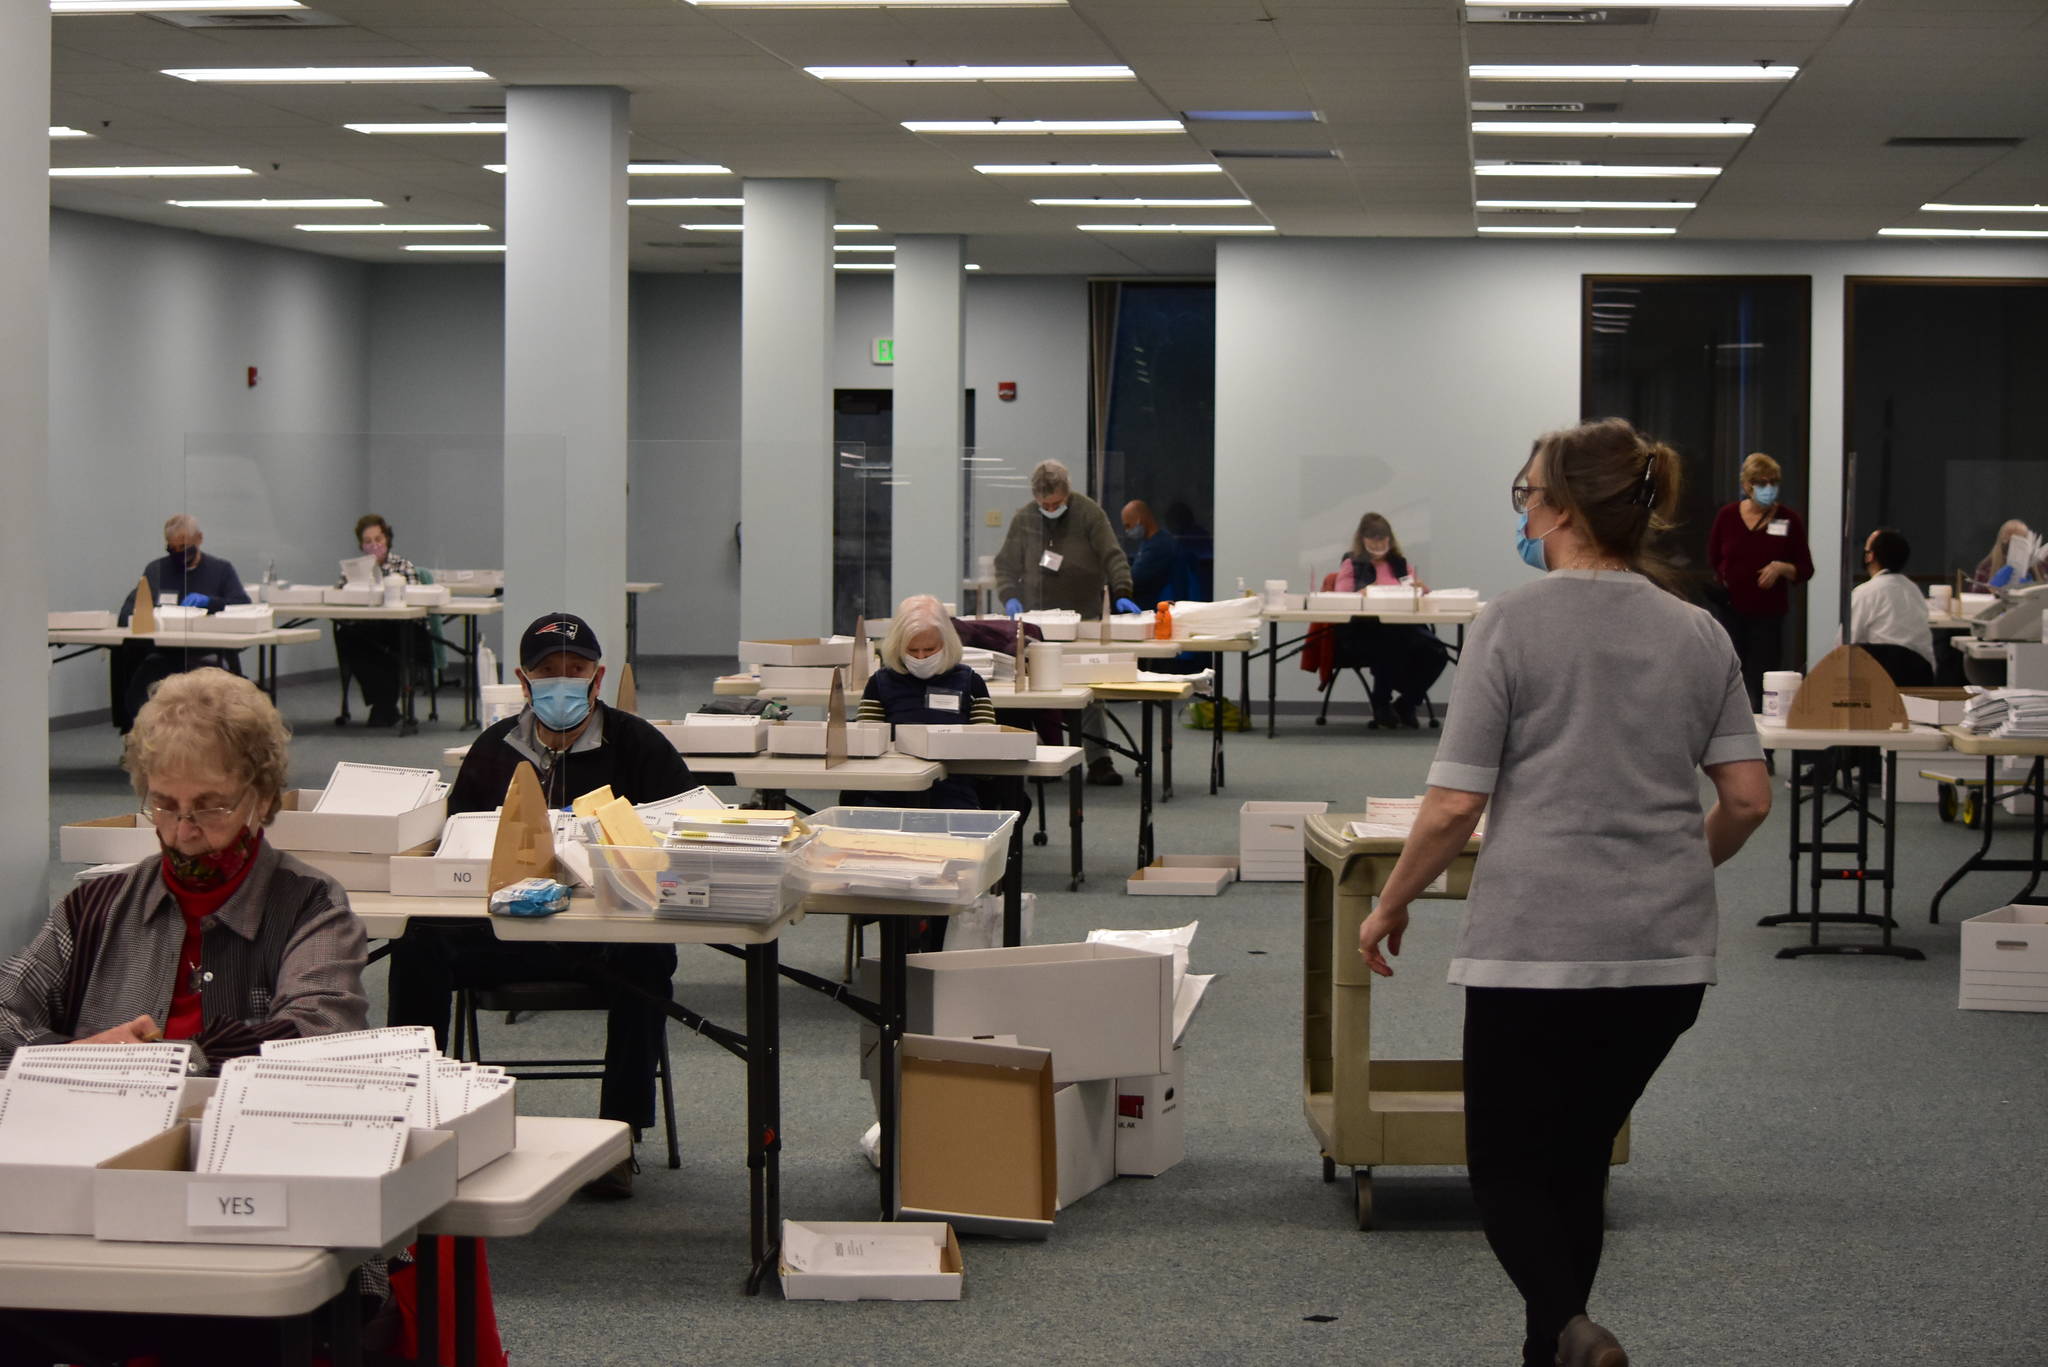 Division of Elections staff conducted an audit of the ballots for Measure 2 at the division's offices at the Mendenhall Mall on Monday, Dec. 7, 2020. DOE announced the audit found no changes from the original count and the results remained the same as originally certified. (Peter Segall / Juneau Empire)